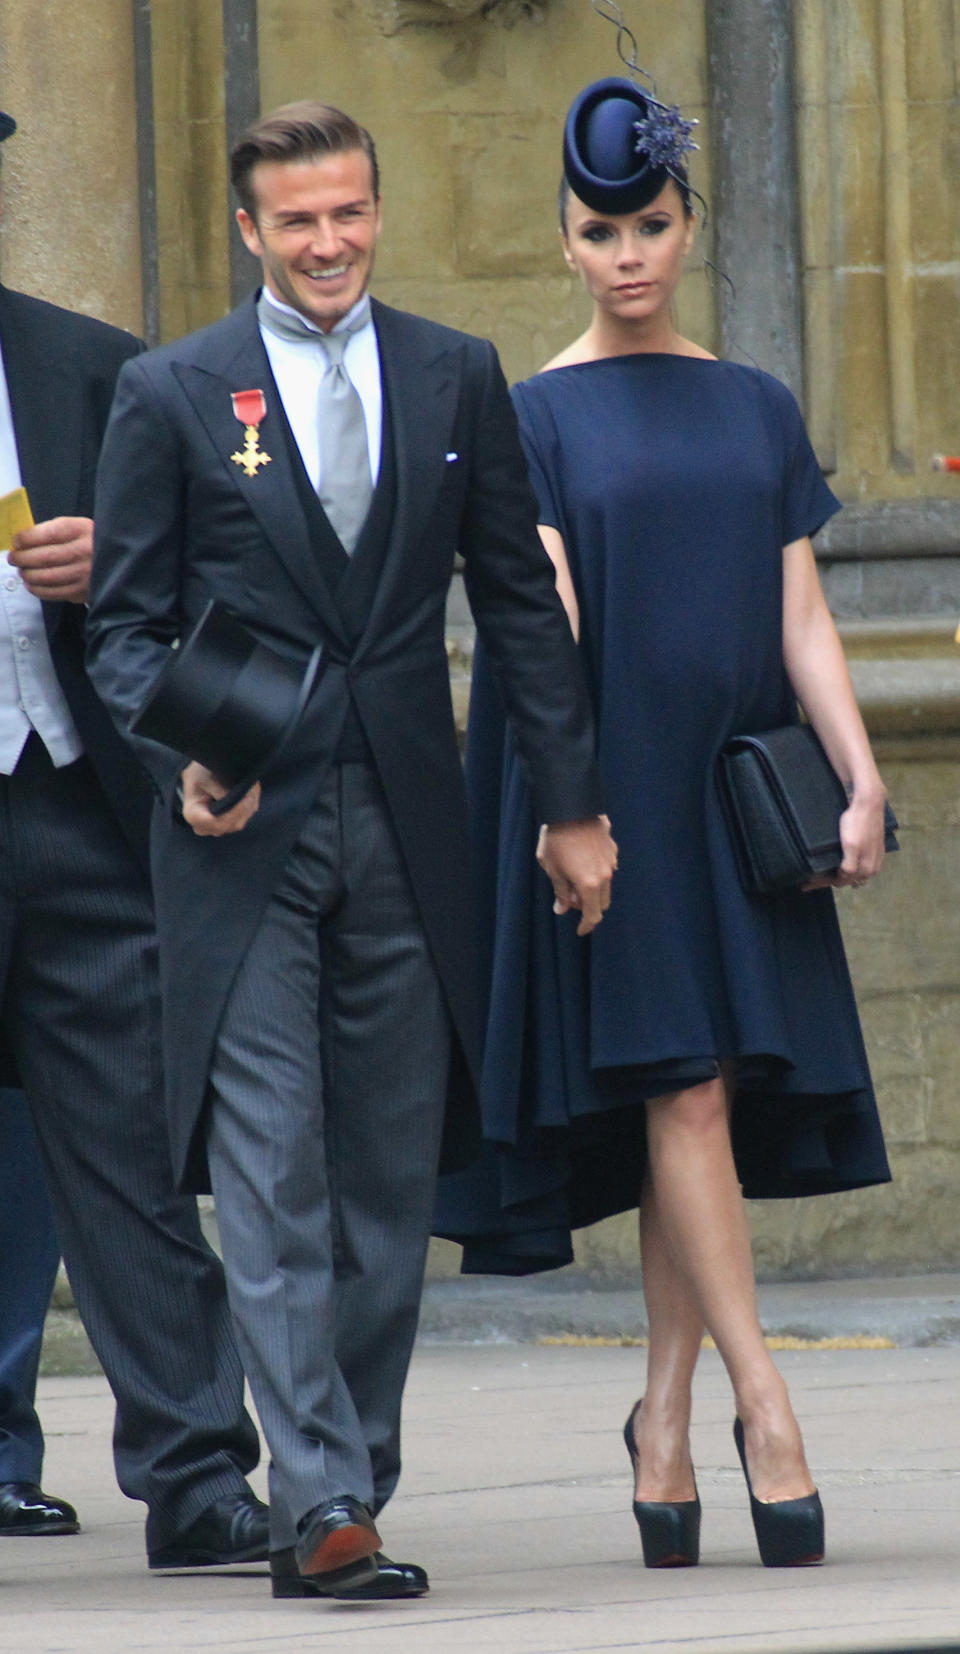 David and Victoria Beckham at the Duke and Duchess of Cambridge's 2011 nuptials [Photo: Getty]